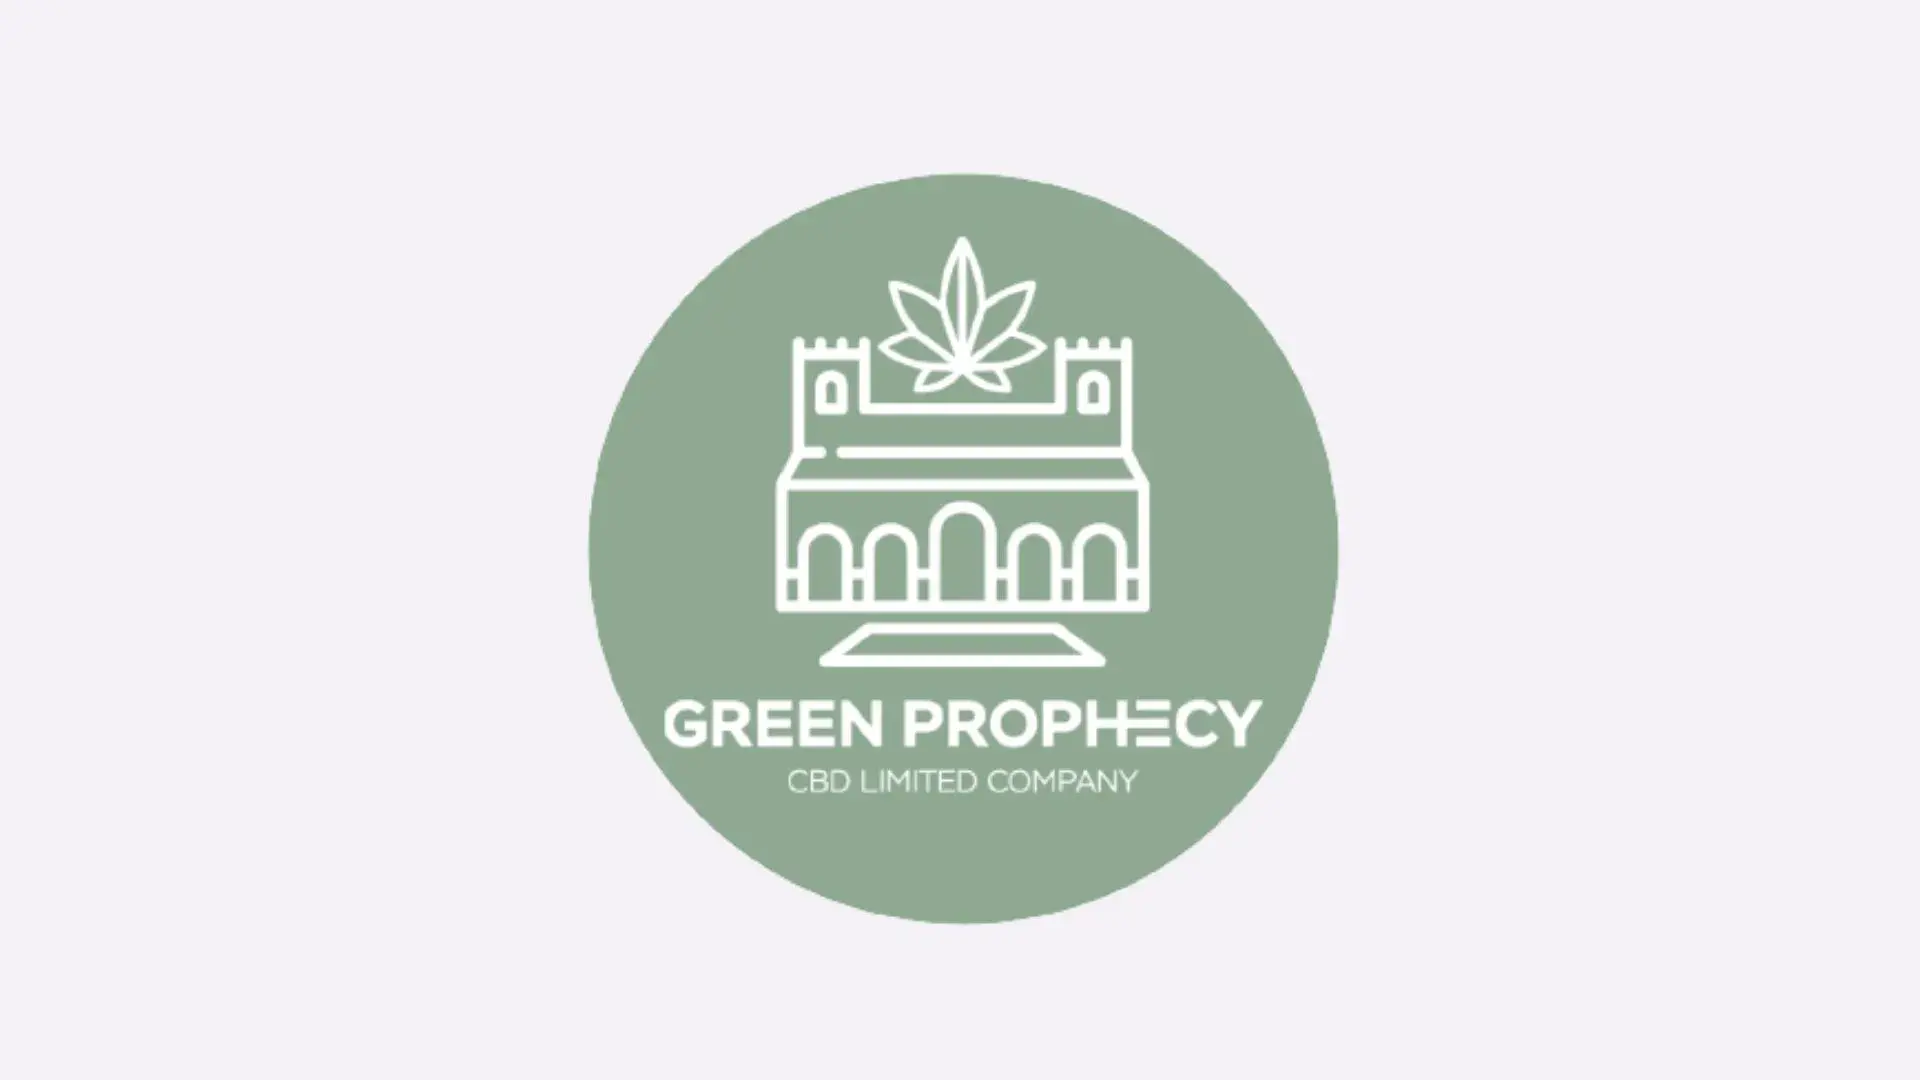 Green Prophecy